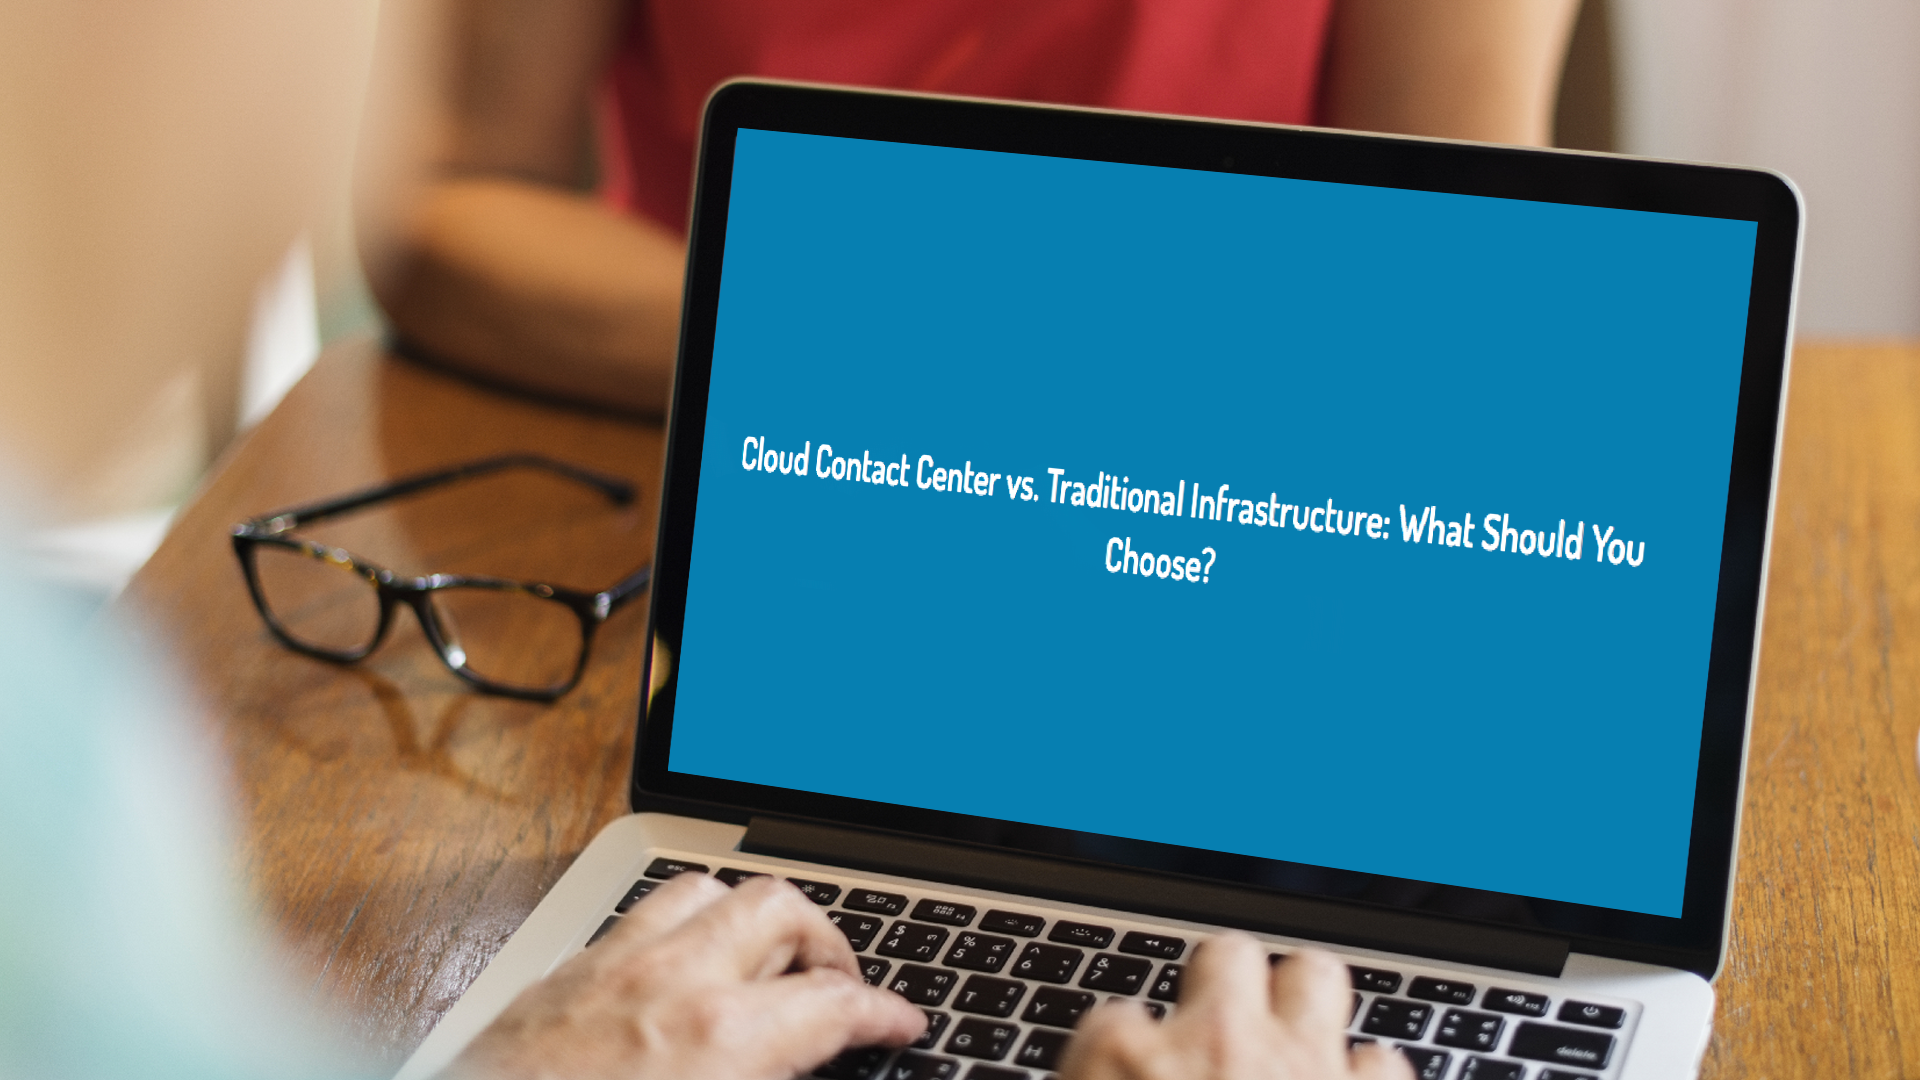 Cloud Contact Center vs. Traditional Infrastructure: What Should You Choose?